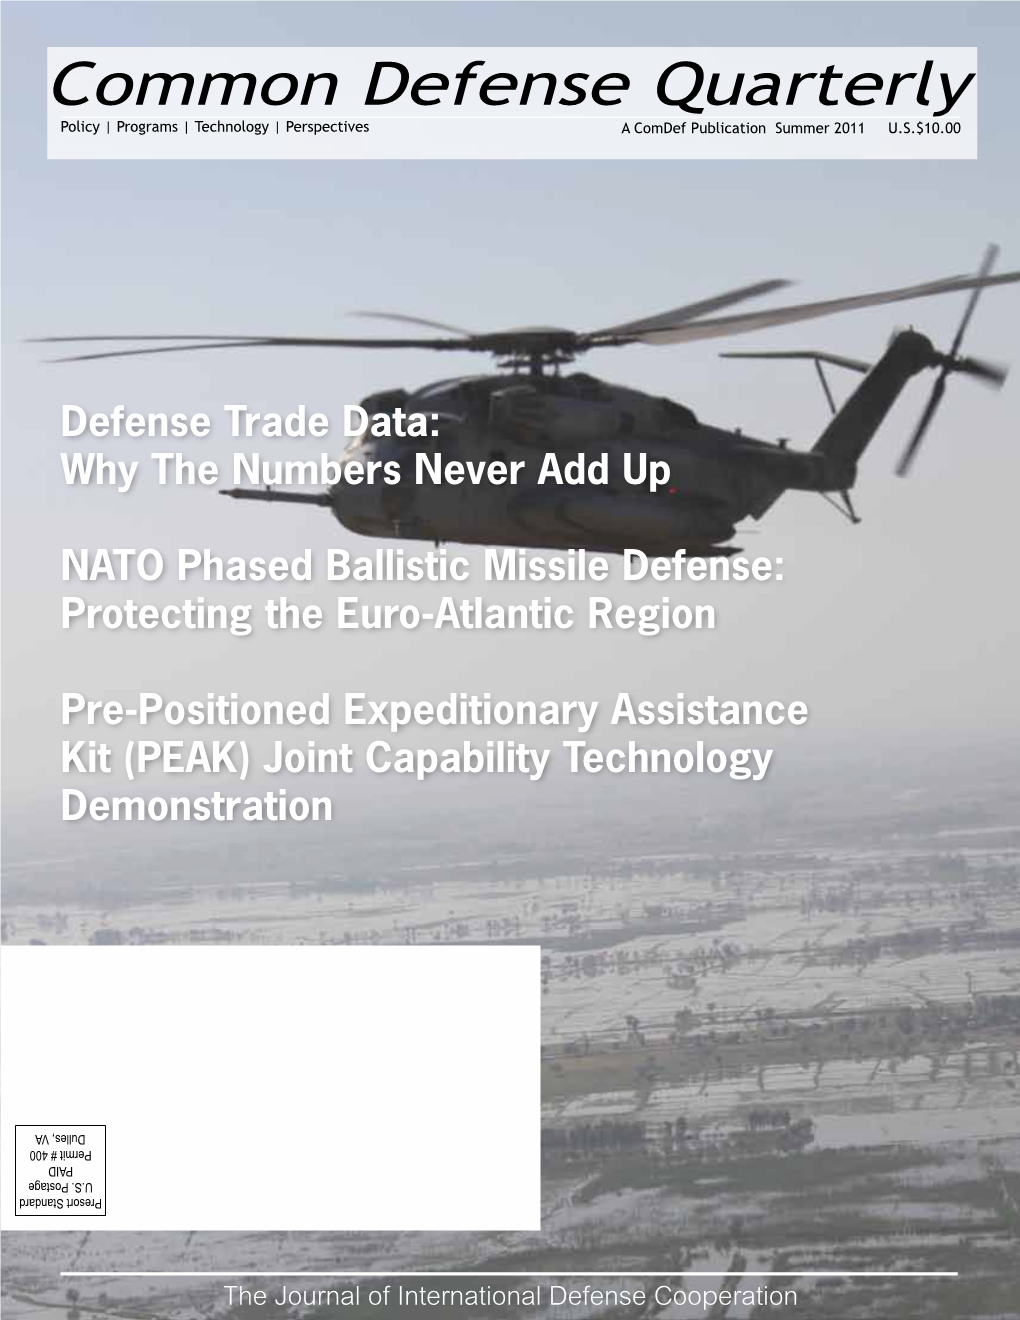 Common Defense Quarterly Policy | Programs | Technology | Perspectives a Comdef Publication Summer 2011 U.S.$10.00